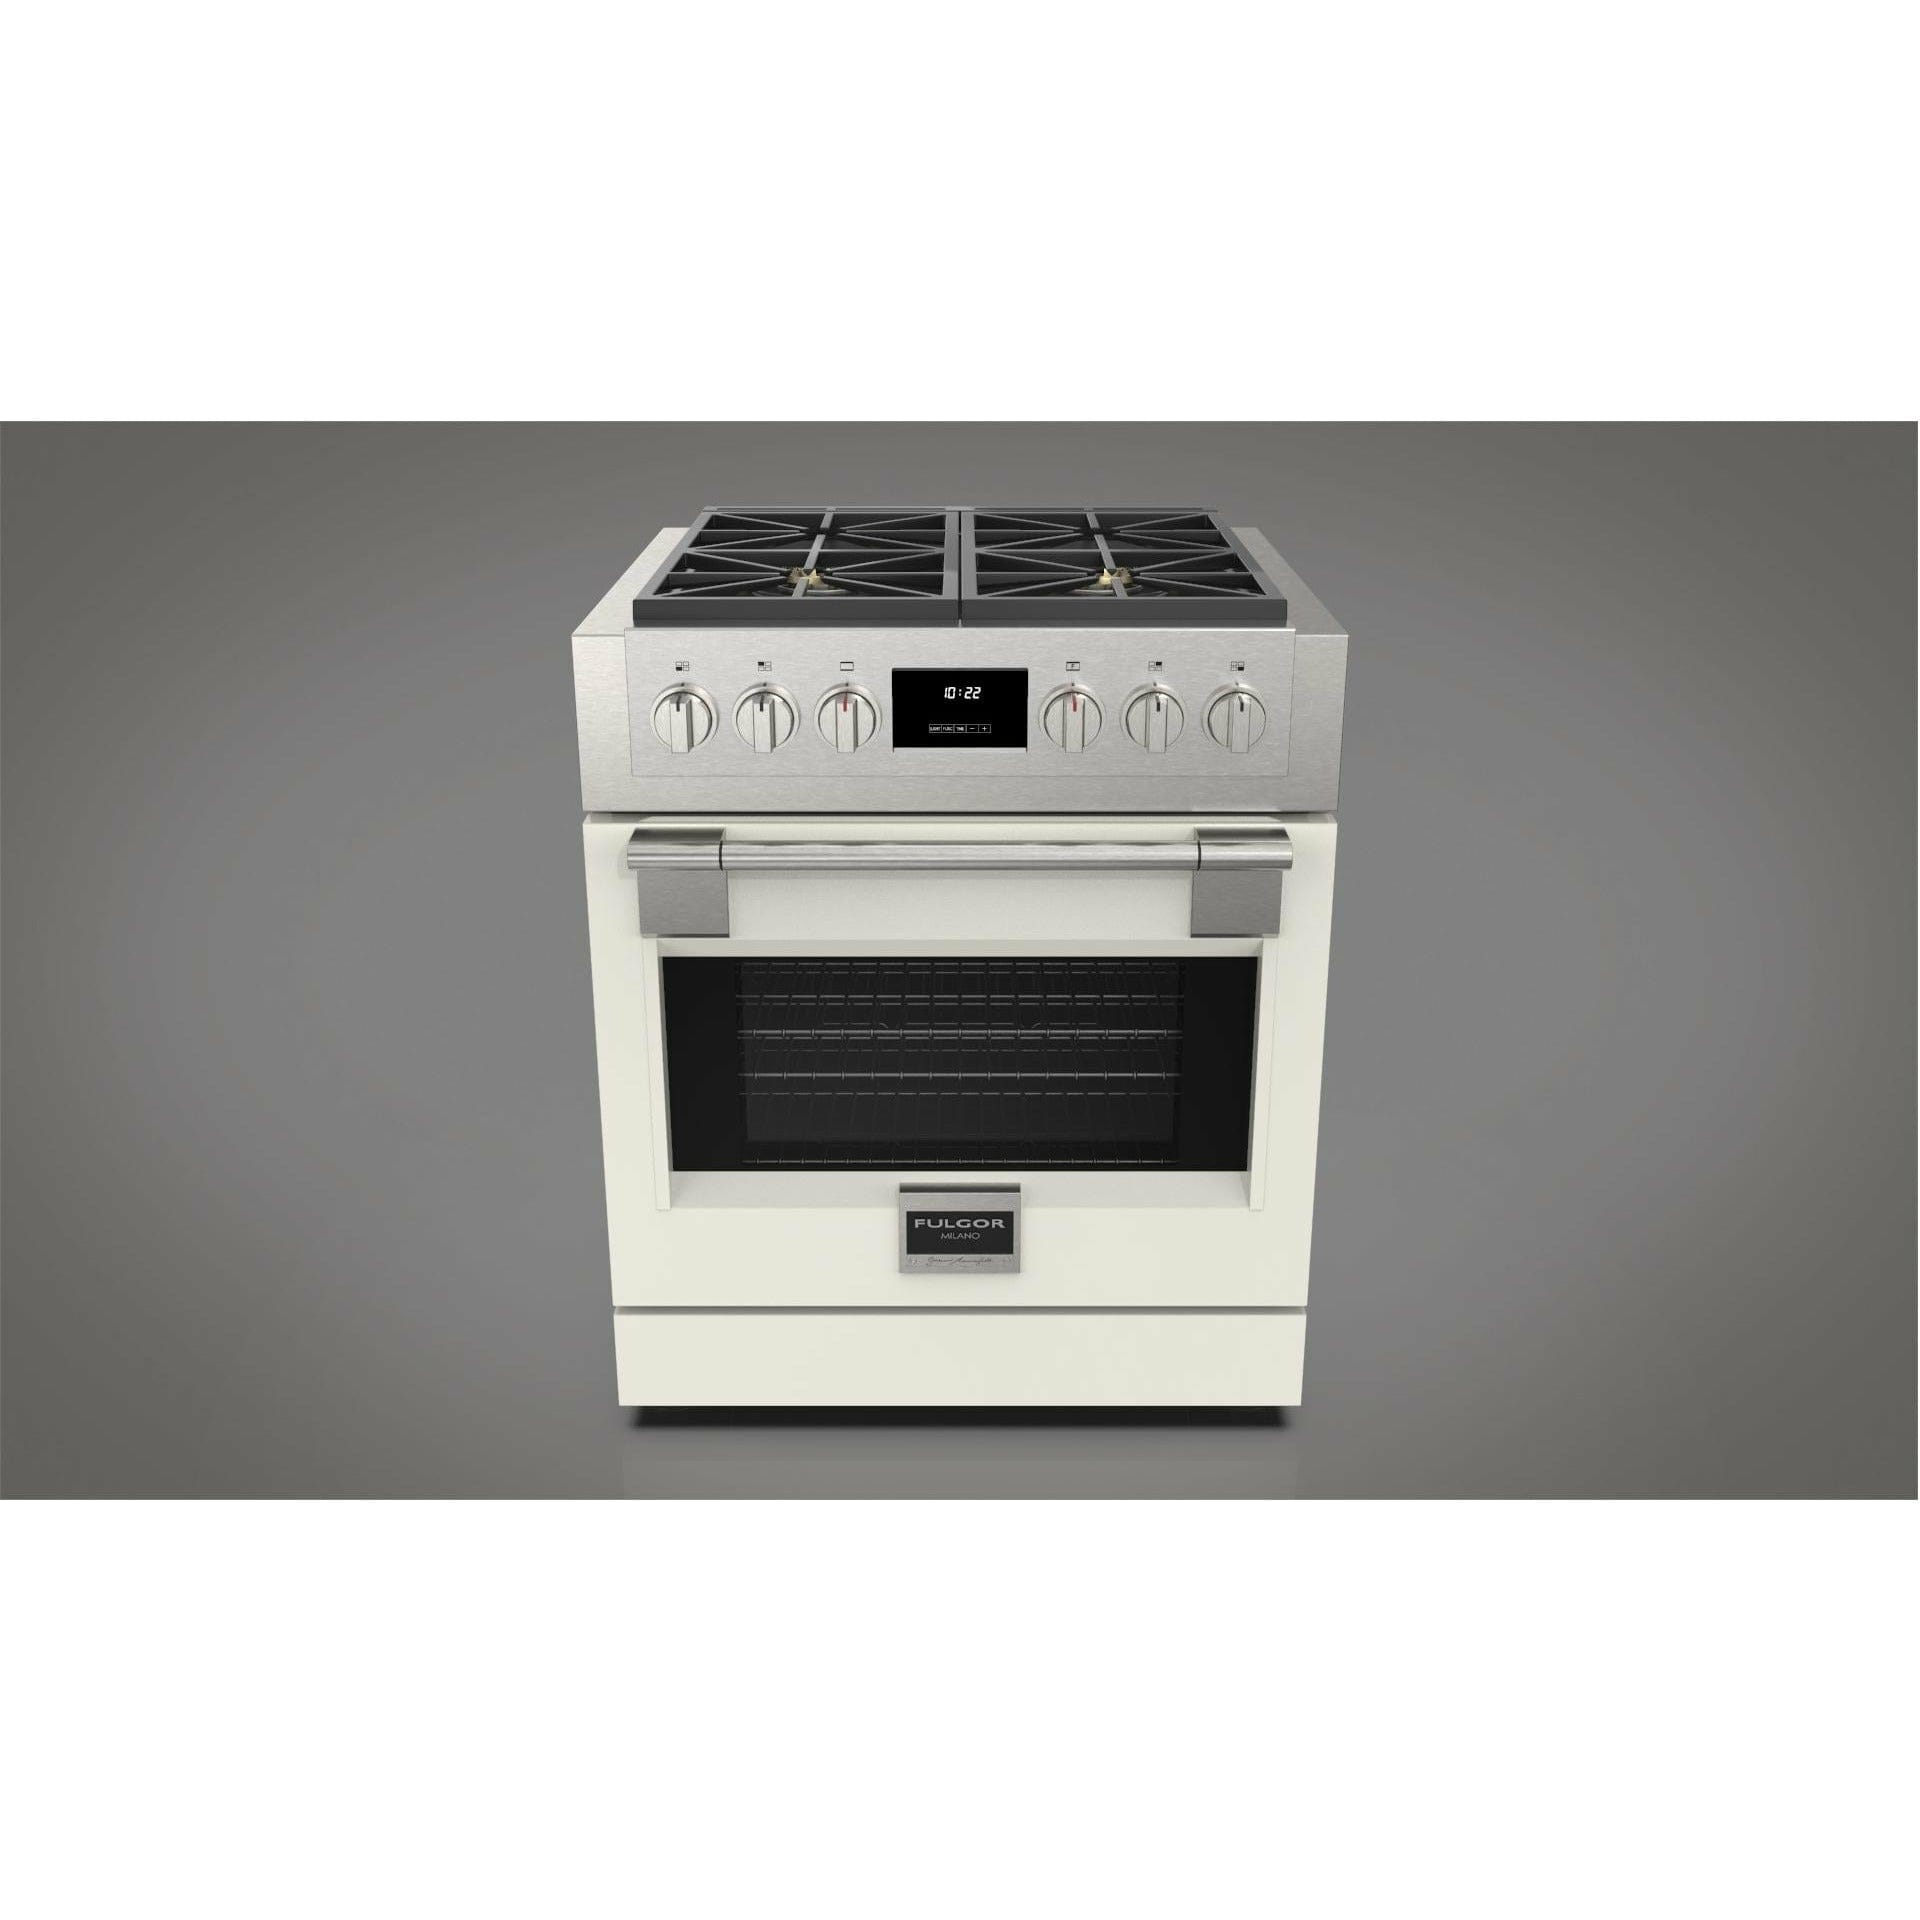 Fulgor Milano 30" Professional All Gas Range with 4 Dual-Flame Burners, 4.4 cu. ft. Capacity w/ Stainless Steel - F6PGR304S2 Ranges PDRKIT30WH Luxury Appliances Direct